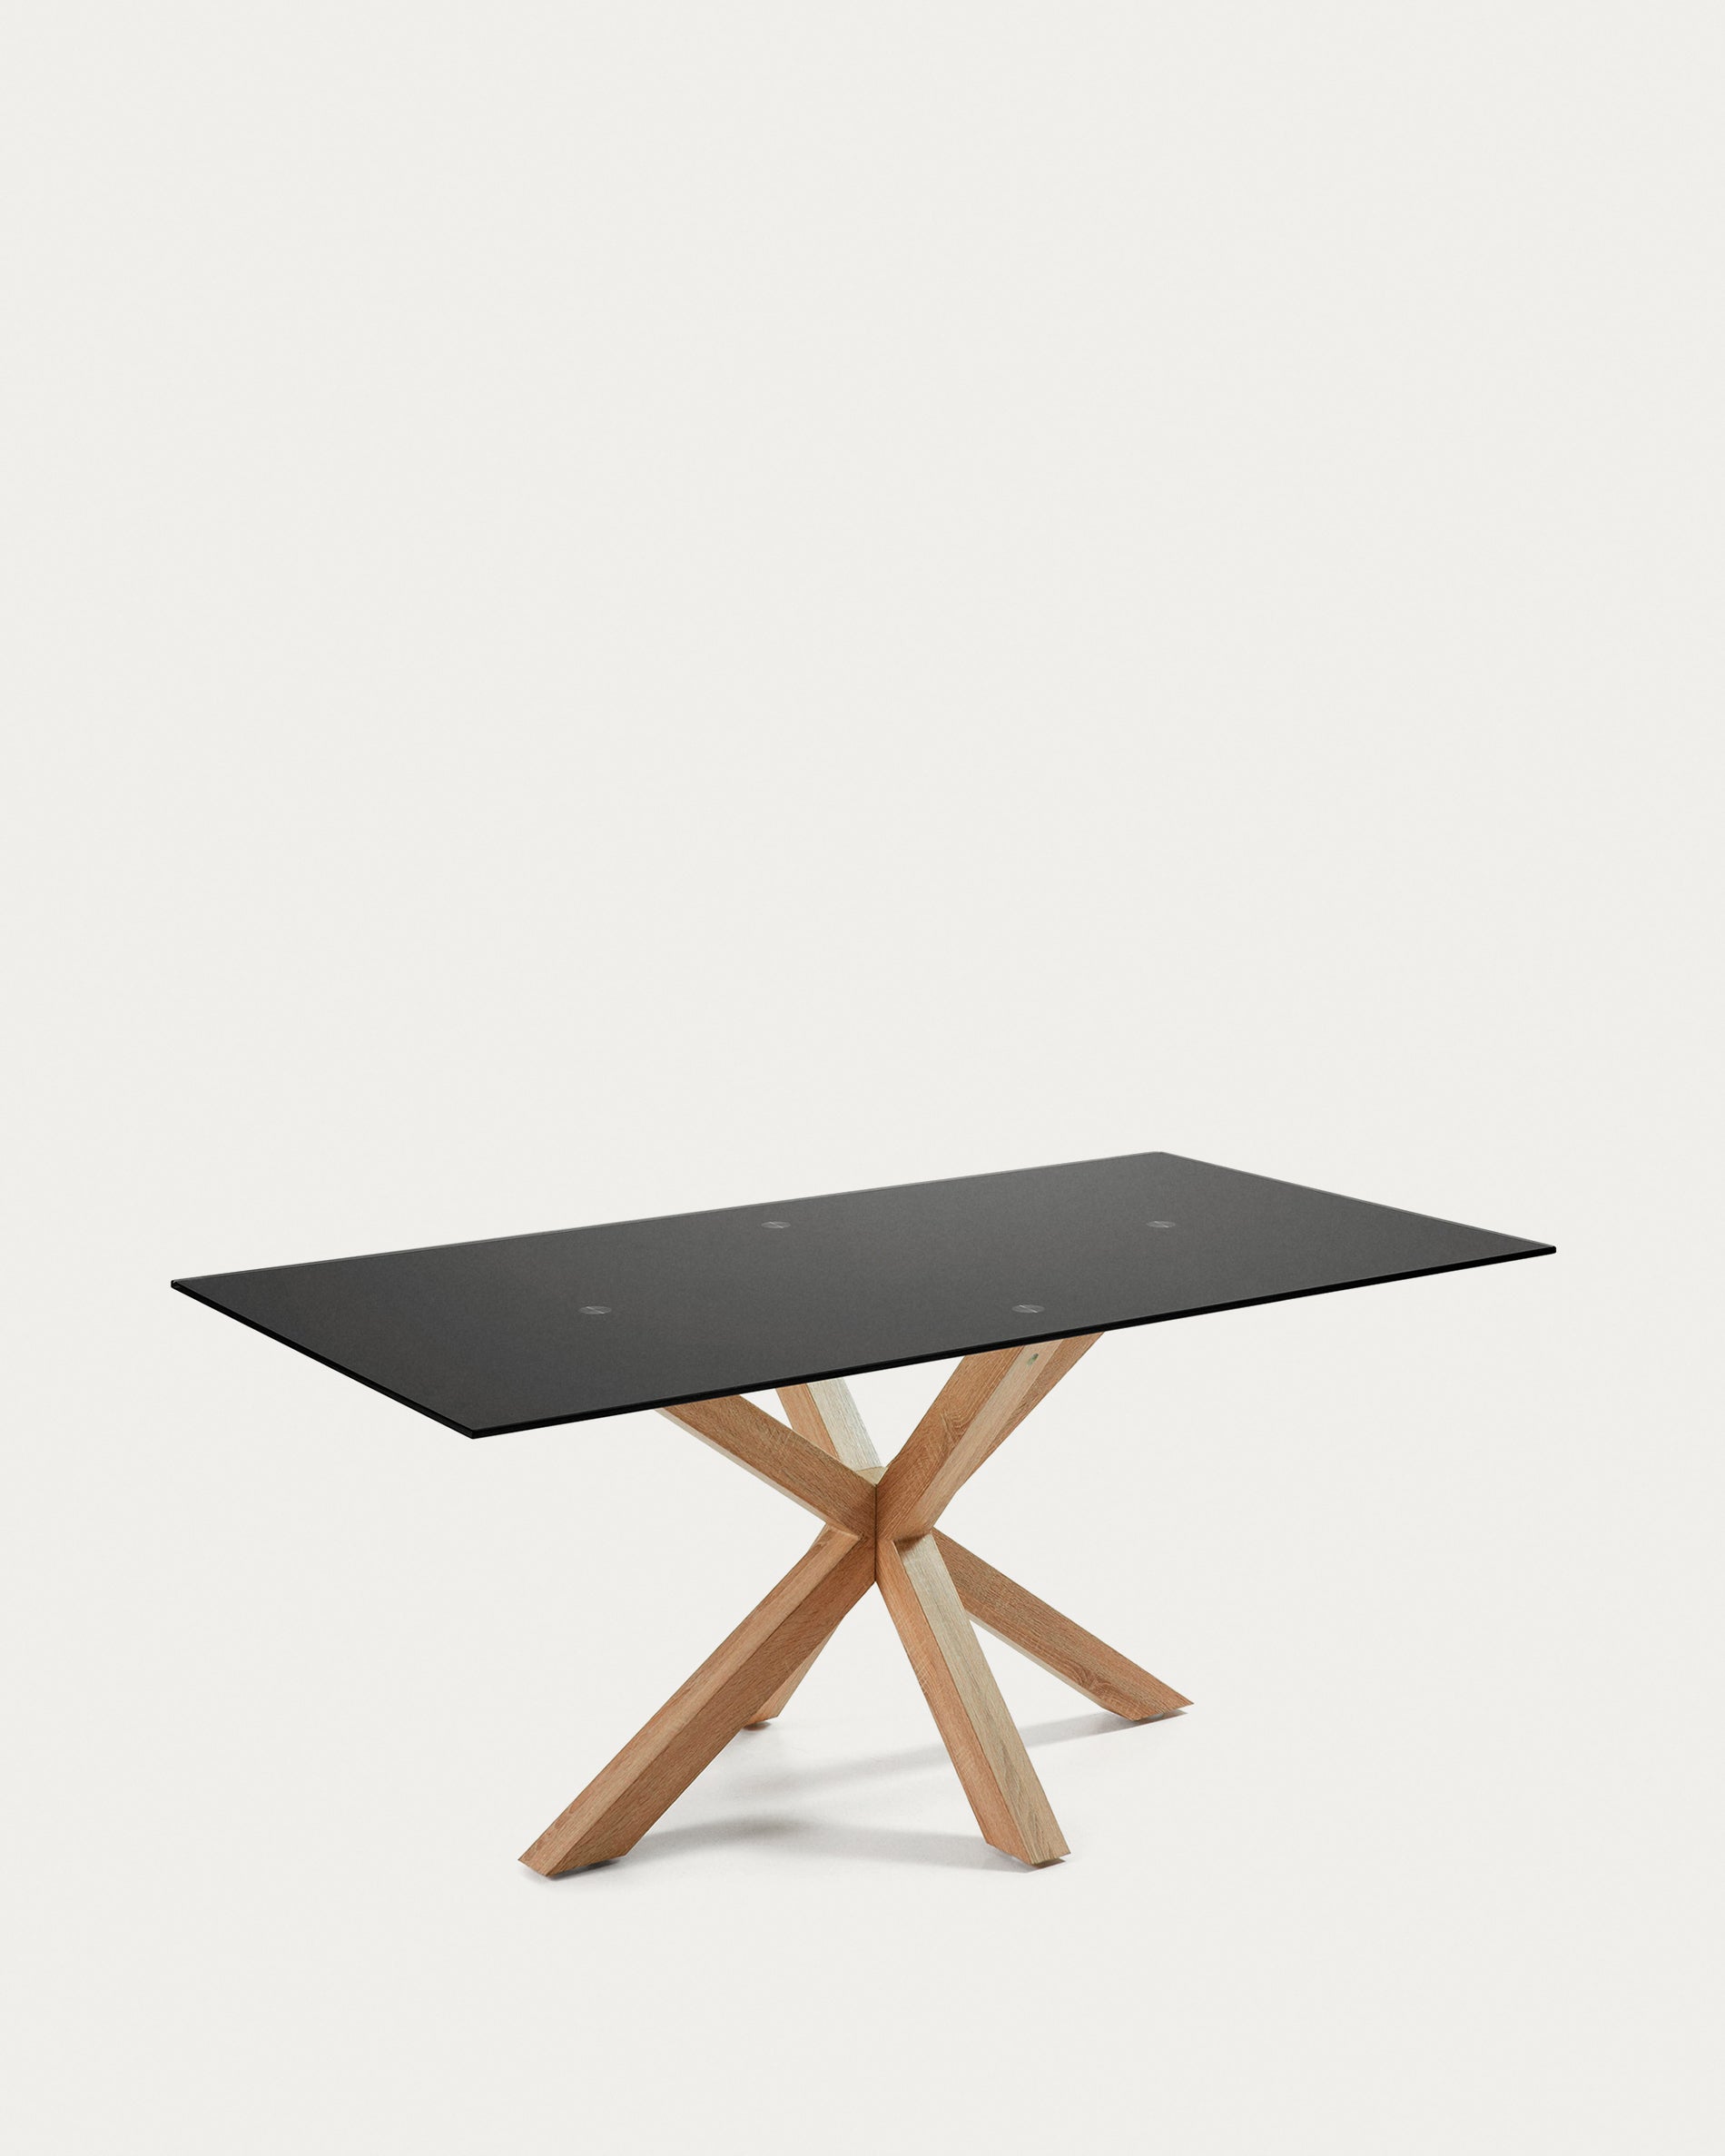 Argo table with black glass and steel legs, wood finish 200 x 100 cm